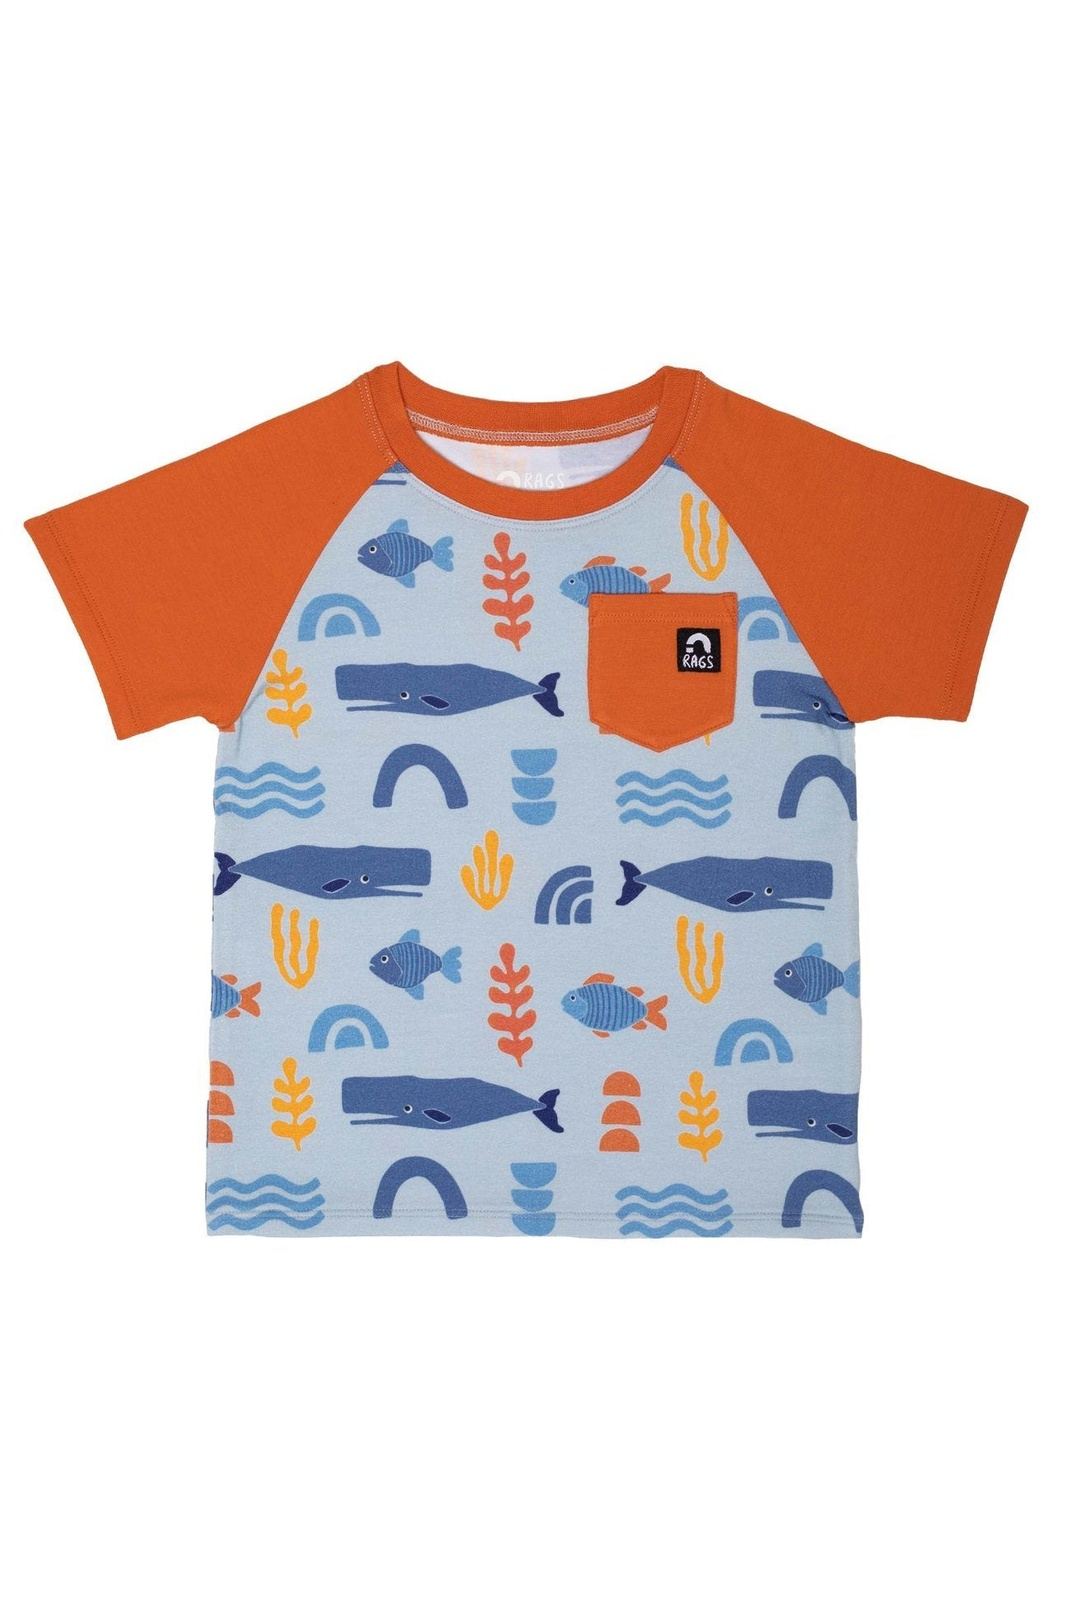 Short Raglan Sleeve Pocket Rounded Kids Tee - 'Abstract Ocean' - Tea for Three: A Children's Boutique-New Arrivals-TheT43Shop